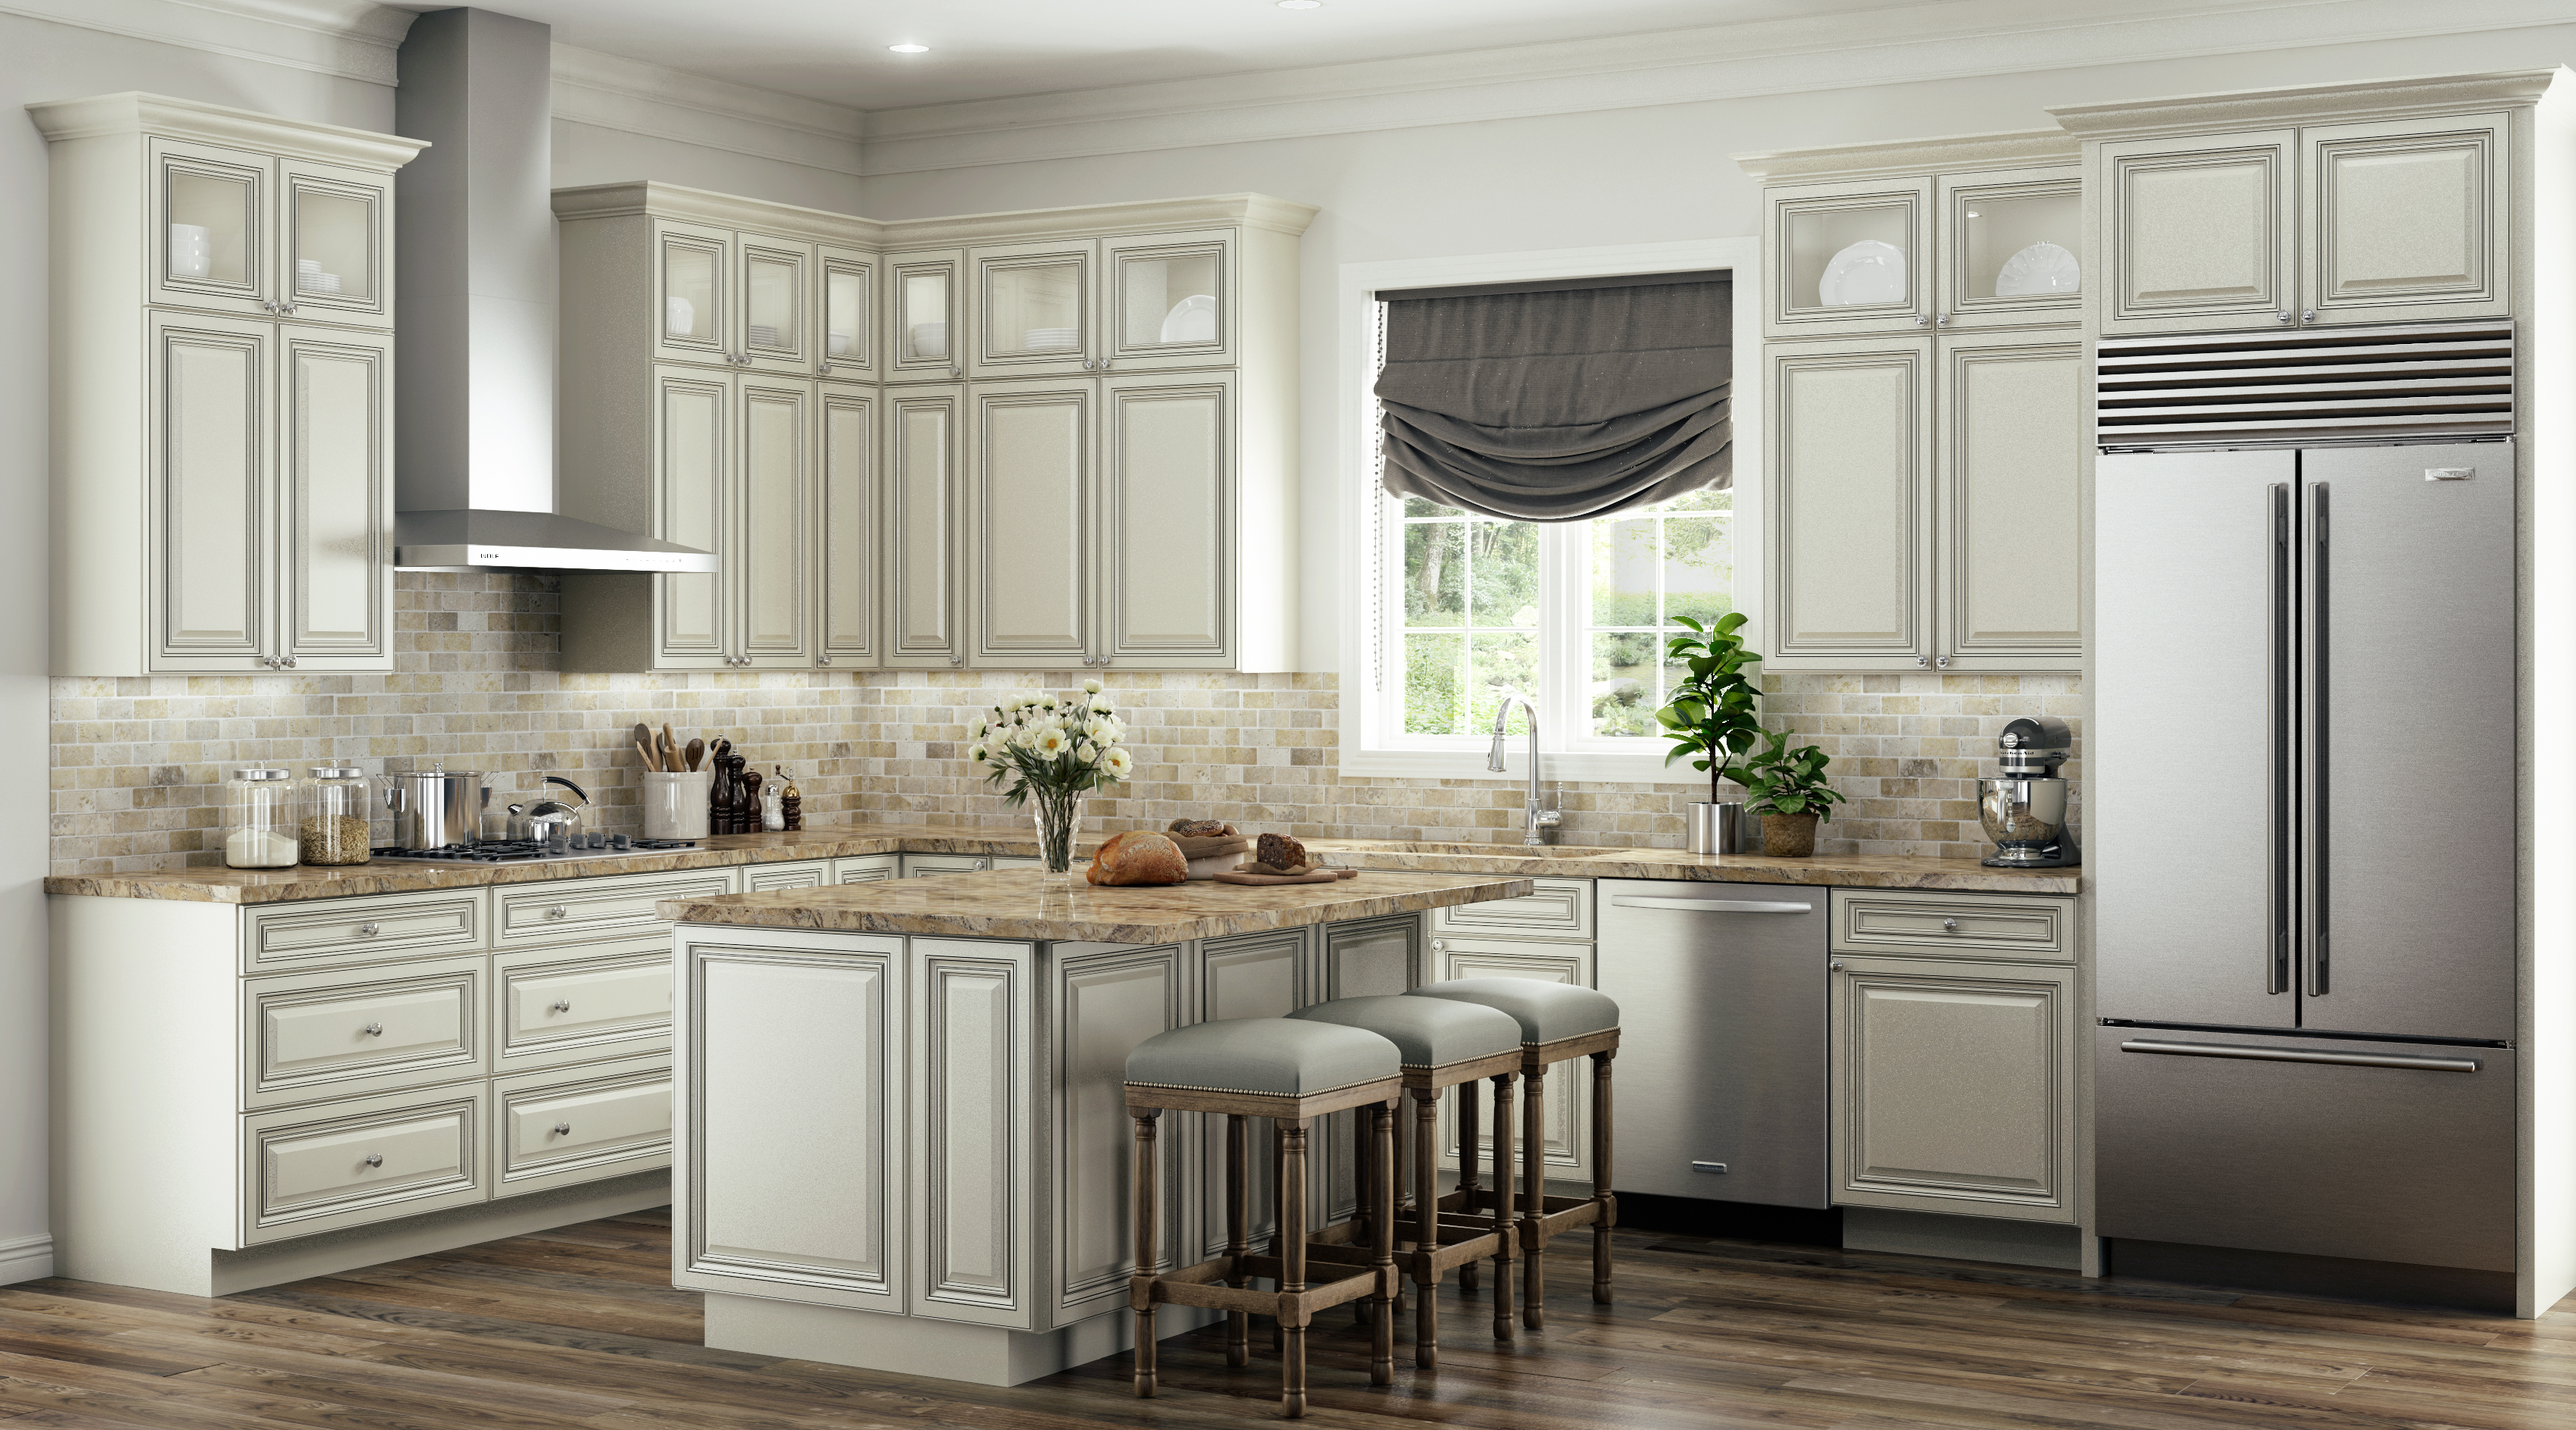 North American Maple Antique White Glaze Kitchen Cabinets With